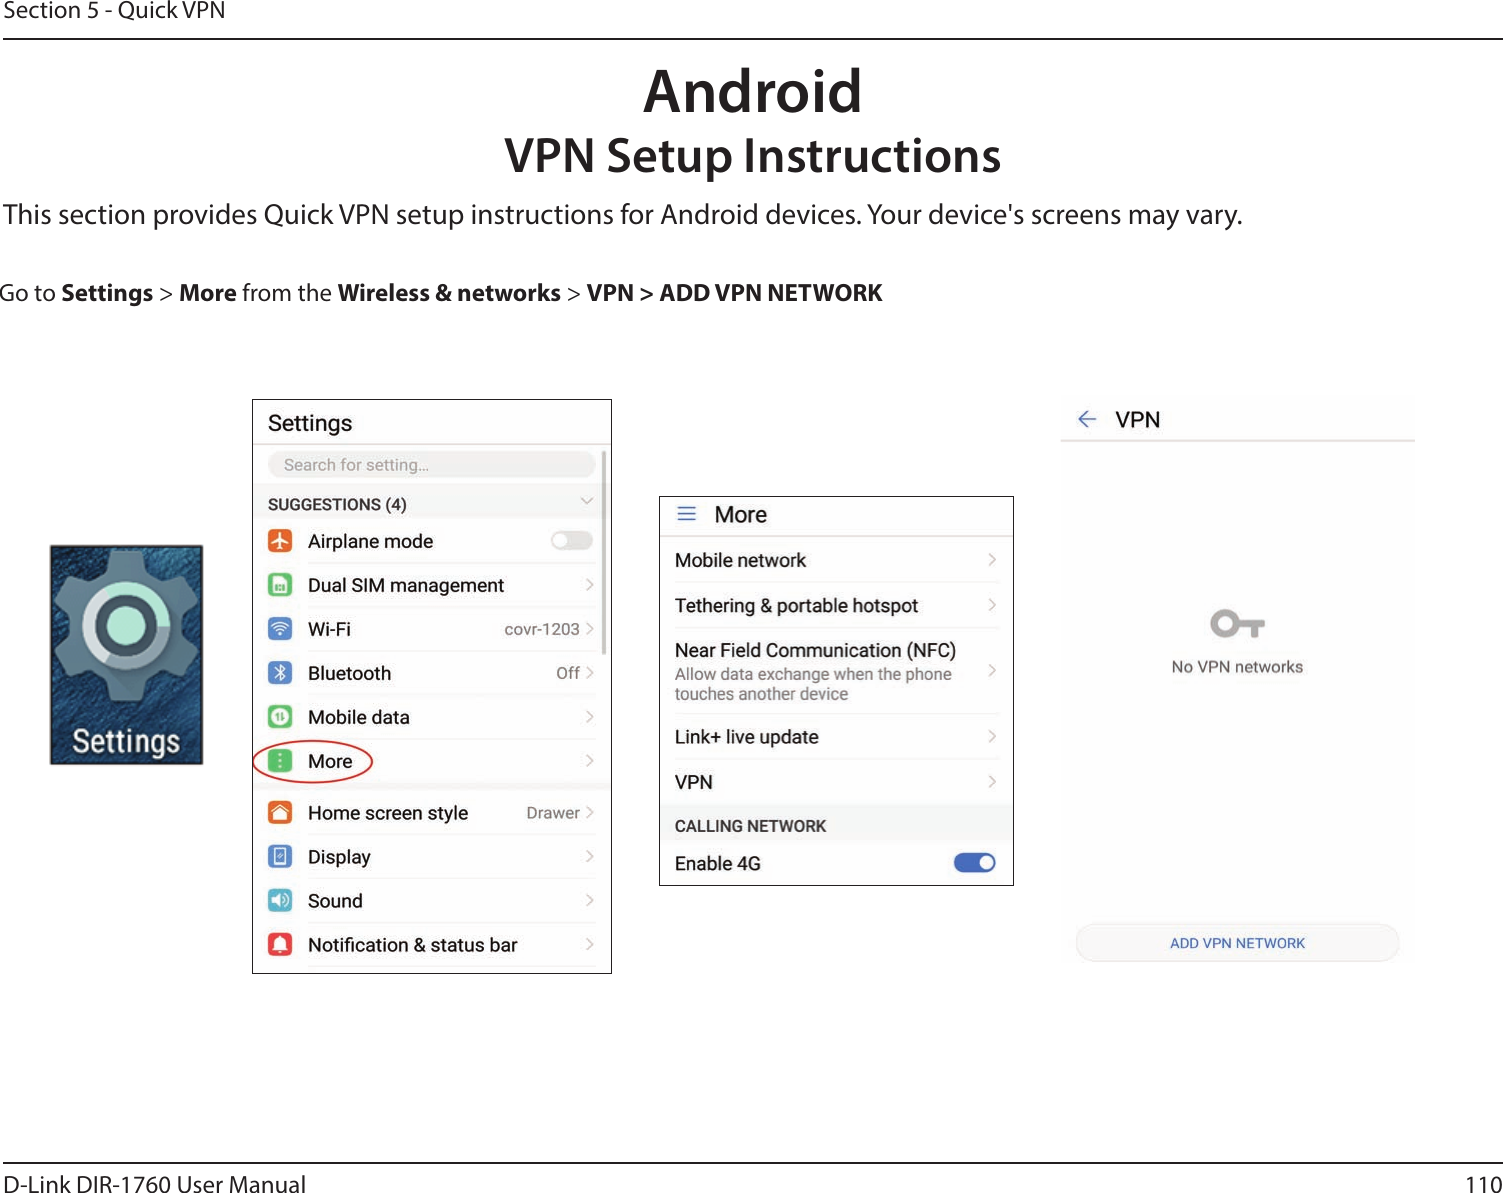 110D-Link DIR-1760 User ManualSection 5 - Quick VPNThis section provides Quick VPN setup instructions for Android devices. Your device&apos;s screens may vary.Go to Settings &gt; More from the Wireless &amp; networks &gt; VPN &gt; ADD VPN NETWORKAndroidVPN Setup Instructions